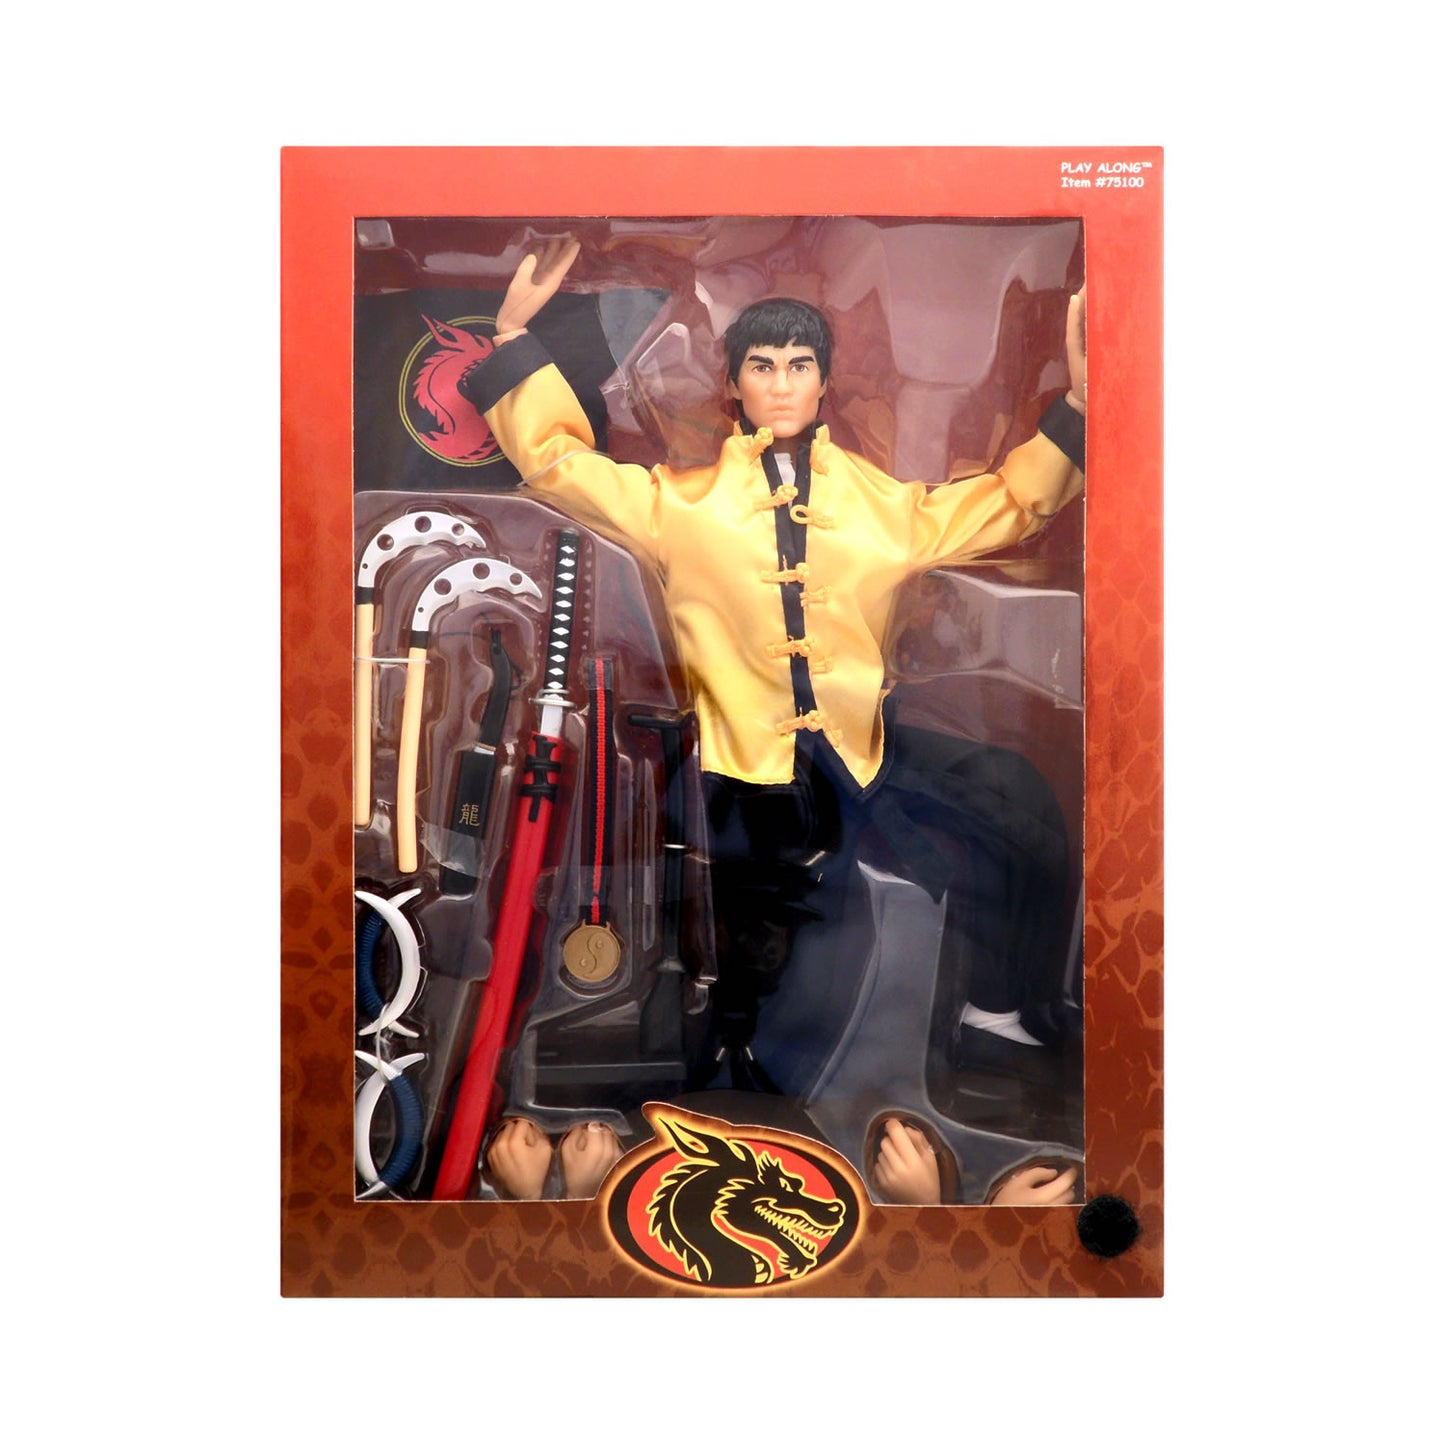 Bruce Lee "The Legend" 12-Inch Action Figure from Bruce Lee: The Dragon Series